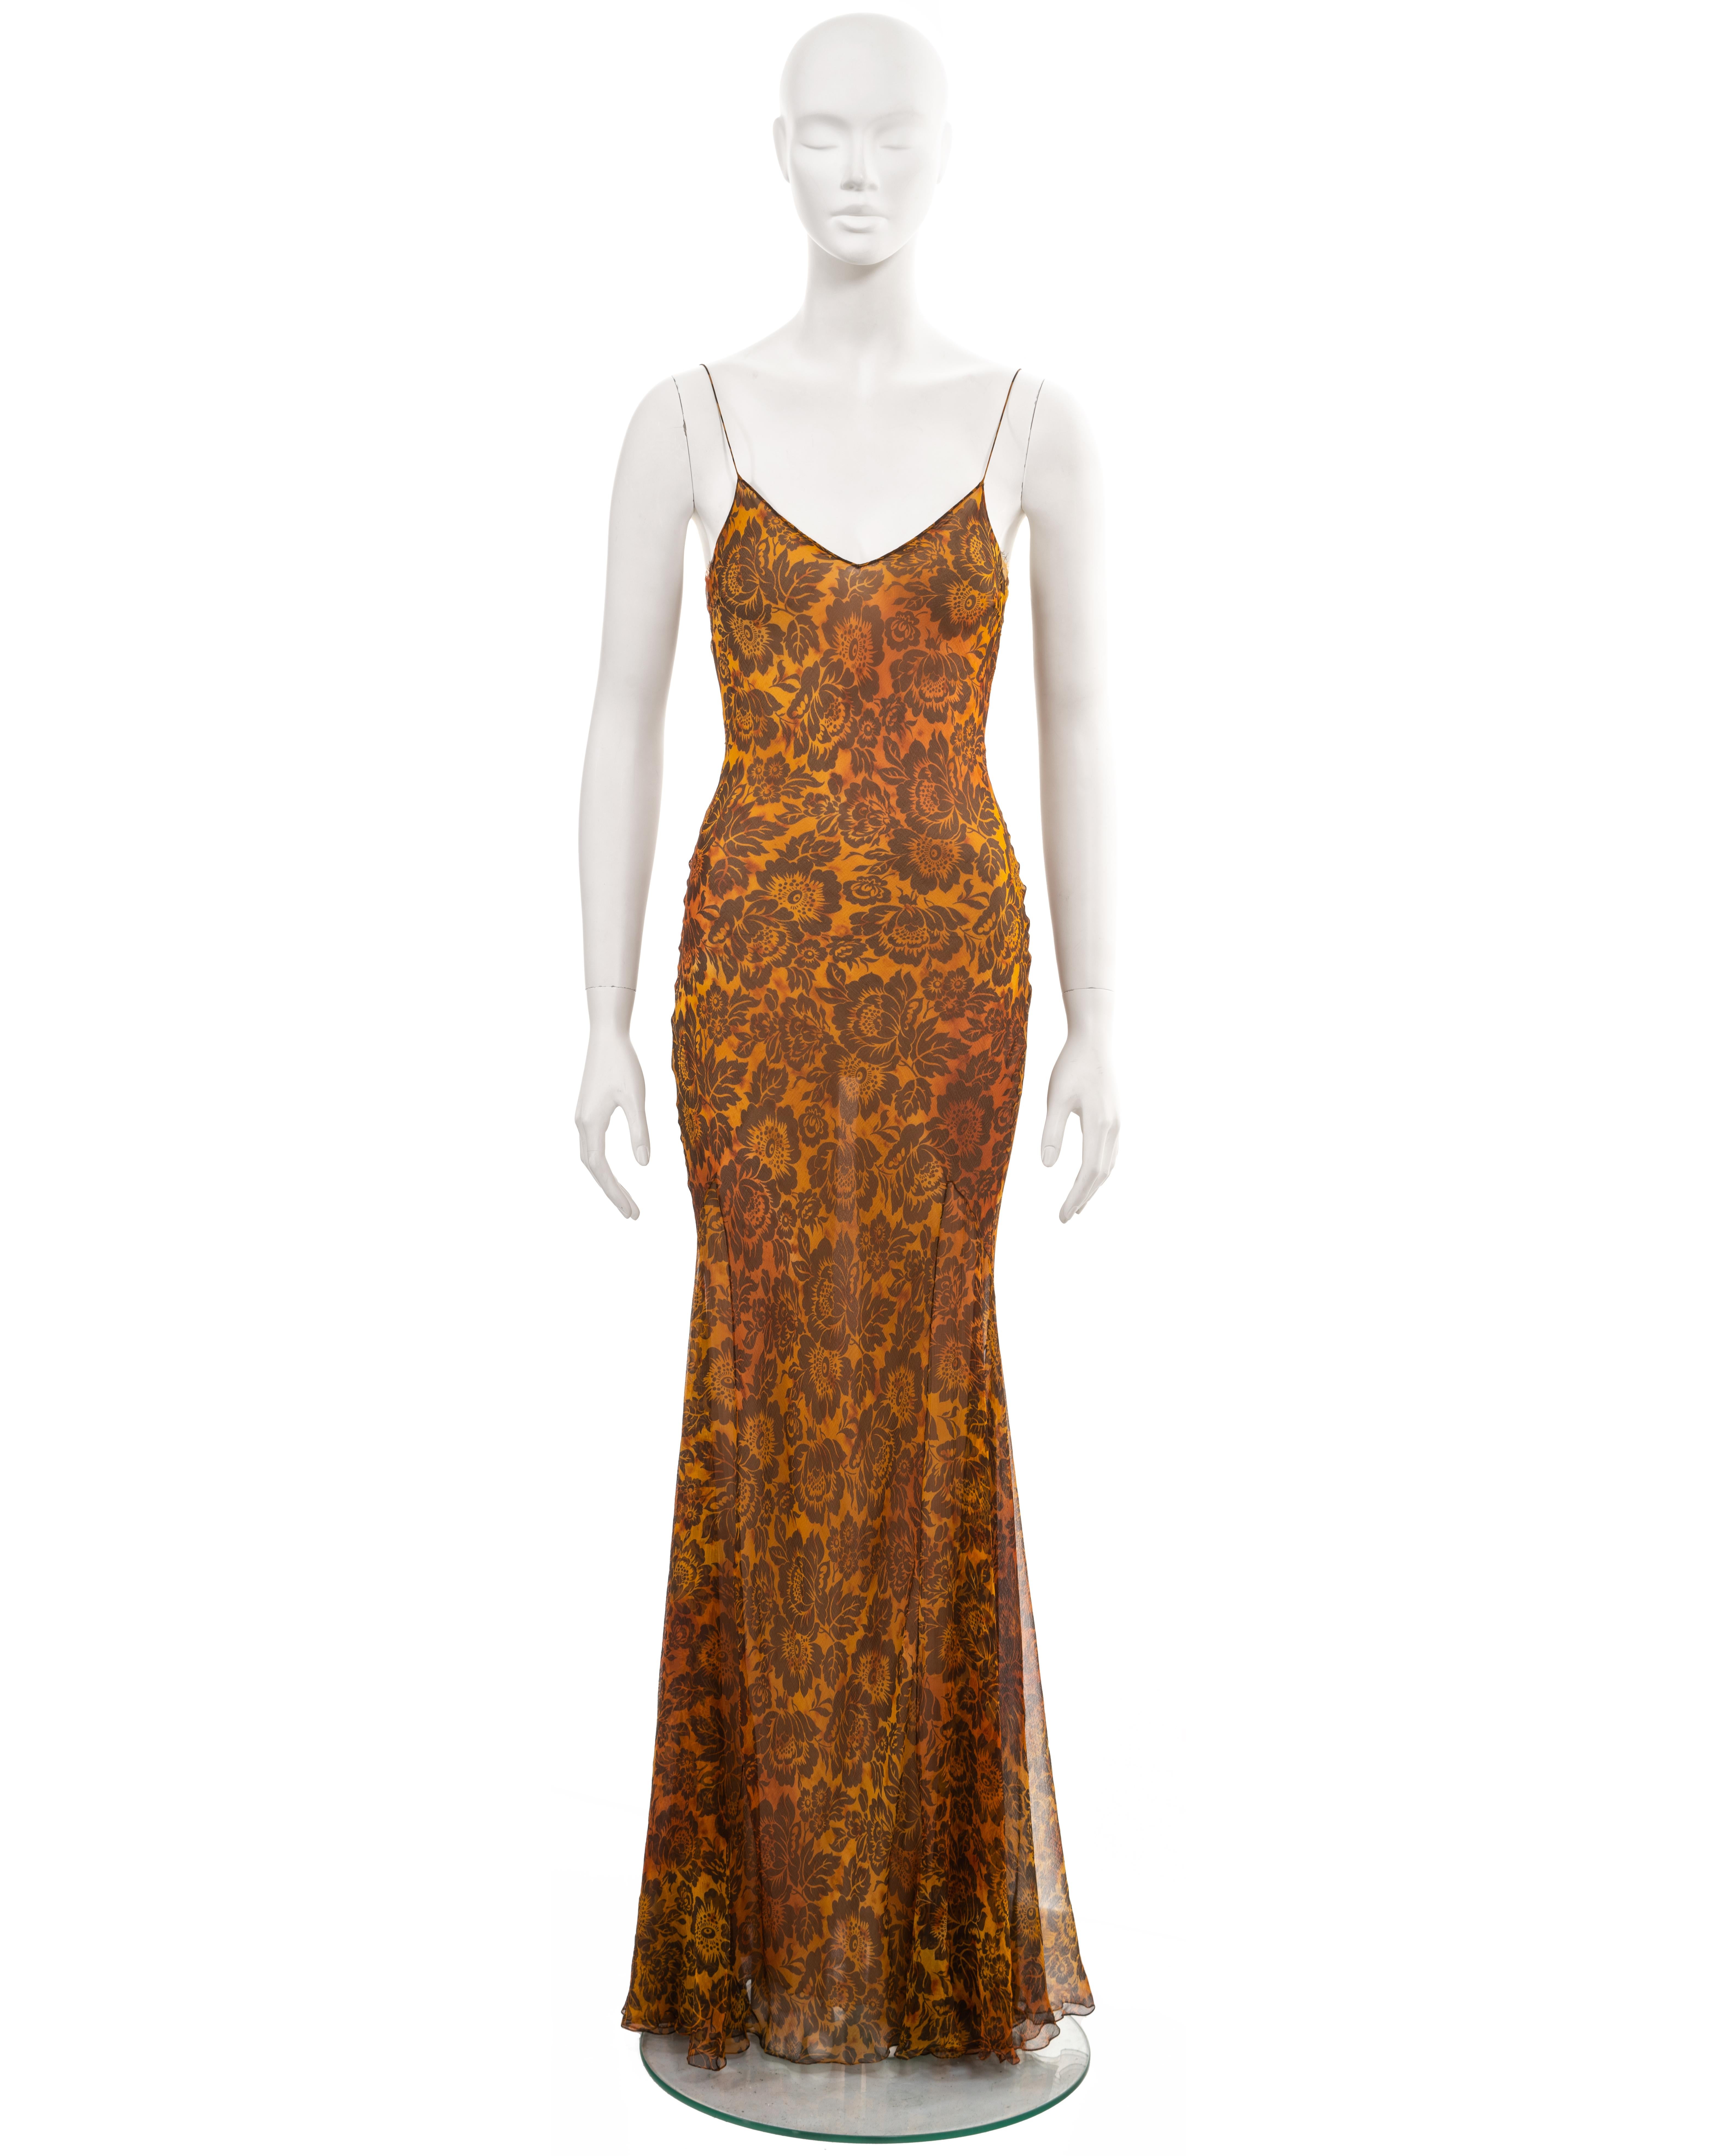 ▪ John Galliano archive evening dress
▪ Sold by One of a Kind Archive
▪ Spring-Summer 1999
▪ Tea-stained bias-cut silk with allover floral motif in burnt orange and brown 
▪ Nude lining 
▪ V-neck 
▪ Spaghetti straps 
▪ Floor-length skirt 
▪ 100%